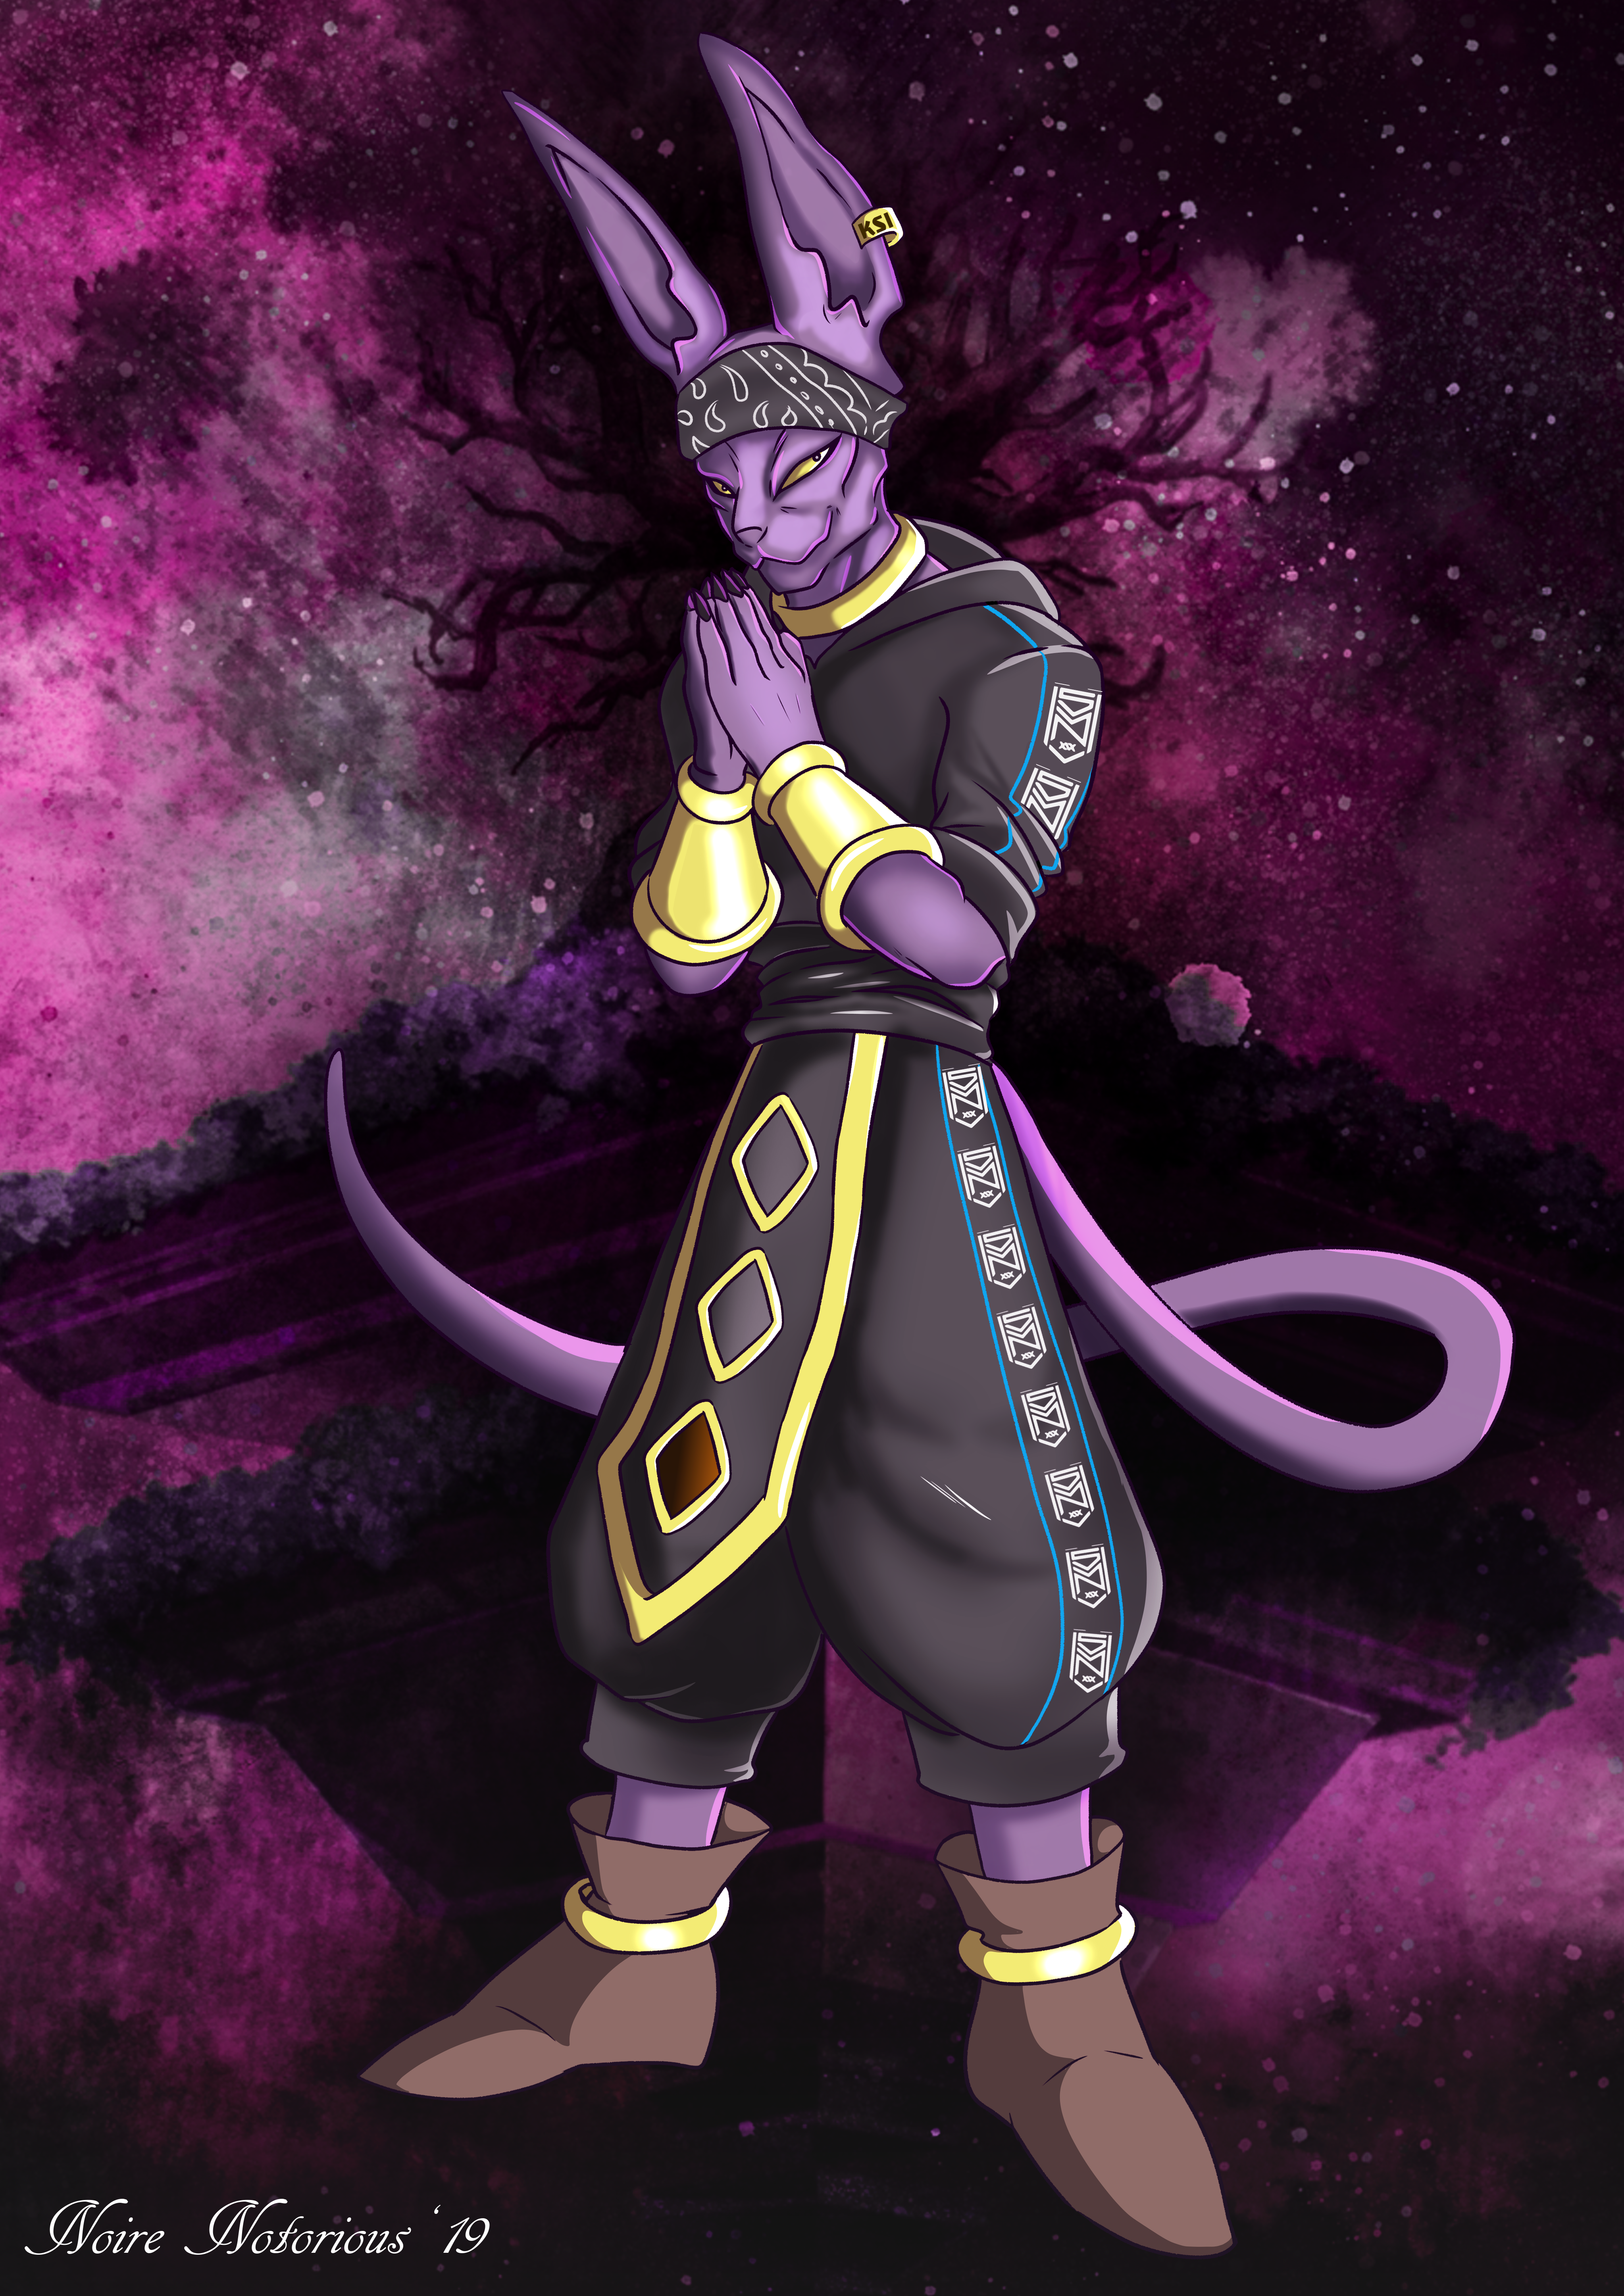 My wife created an epic KSI Beerus tribute. I want to prove to her